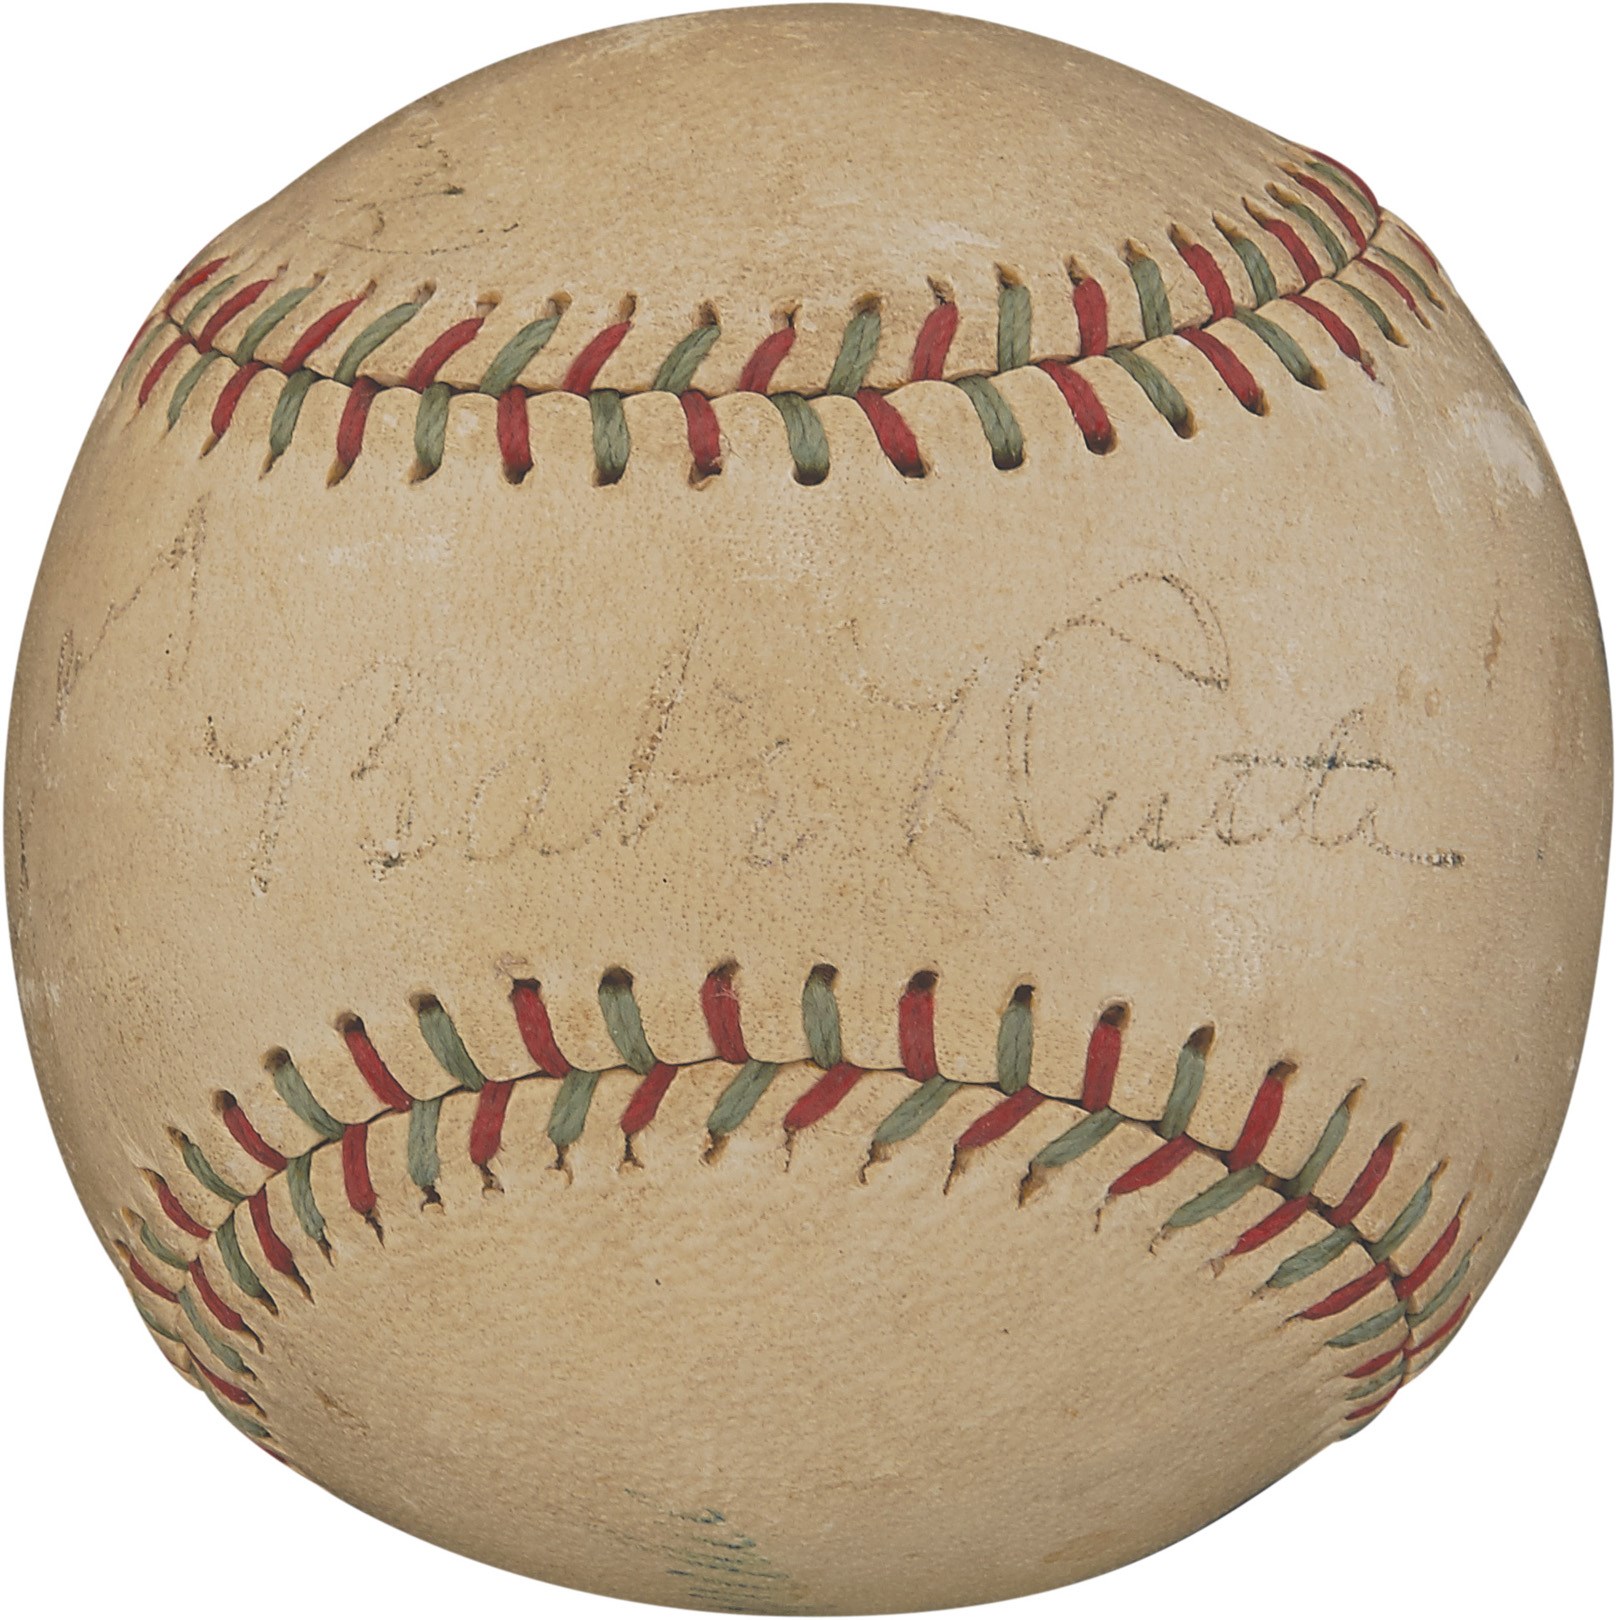 Ruth and Gehrig - Late 1930s Babe Ruth & Lou Gehrig Multi-Signed Baseball (JSA)